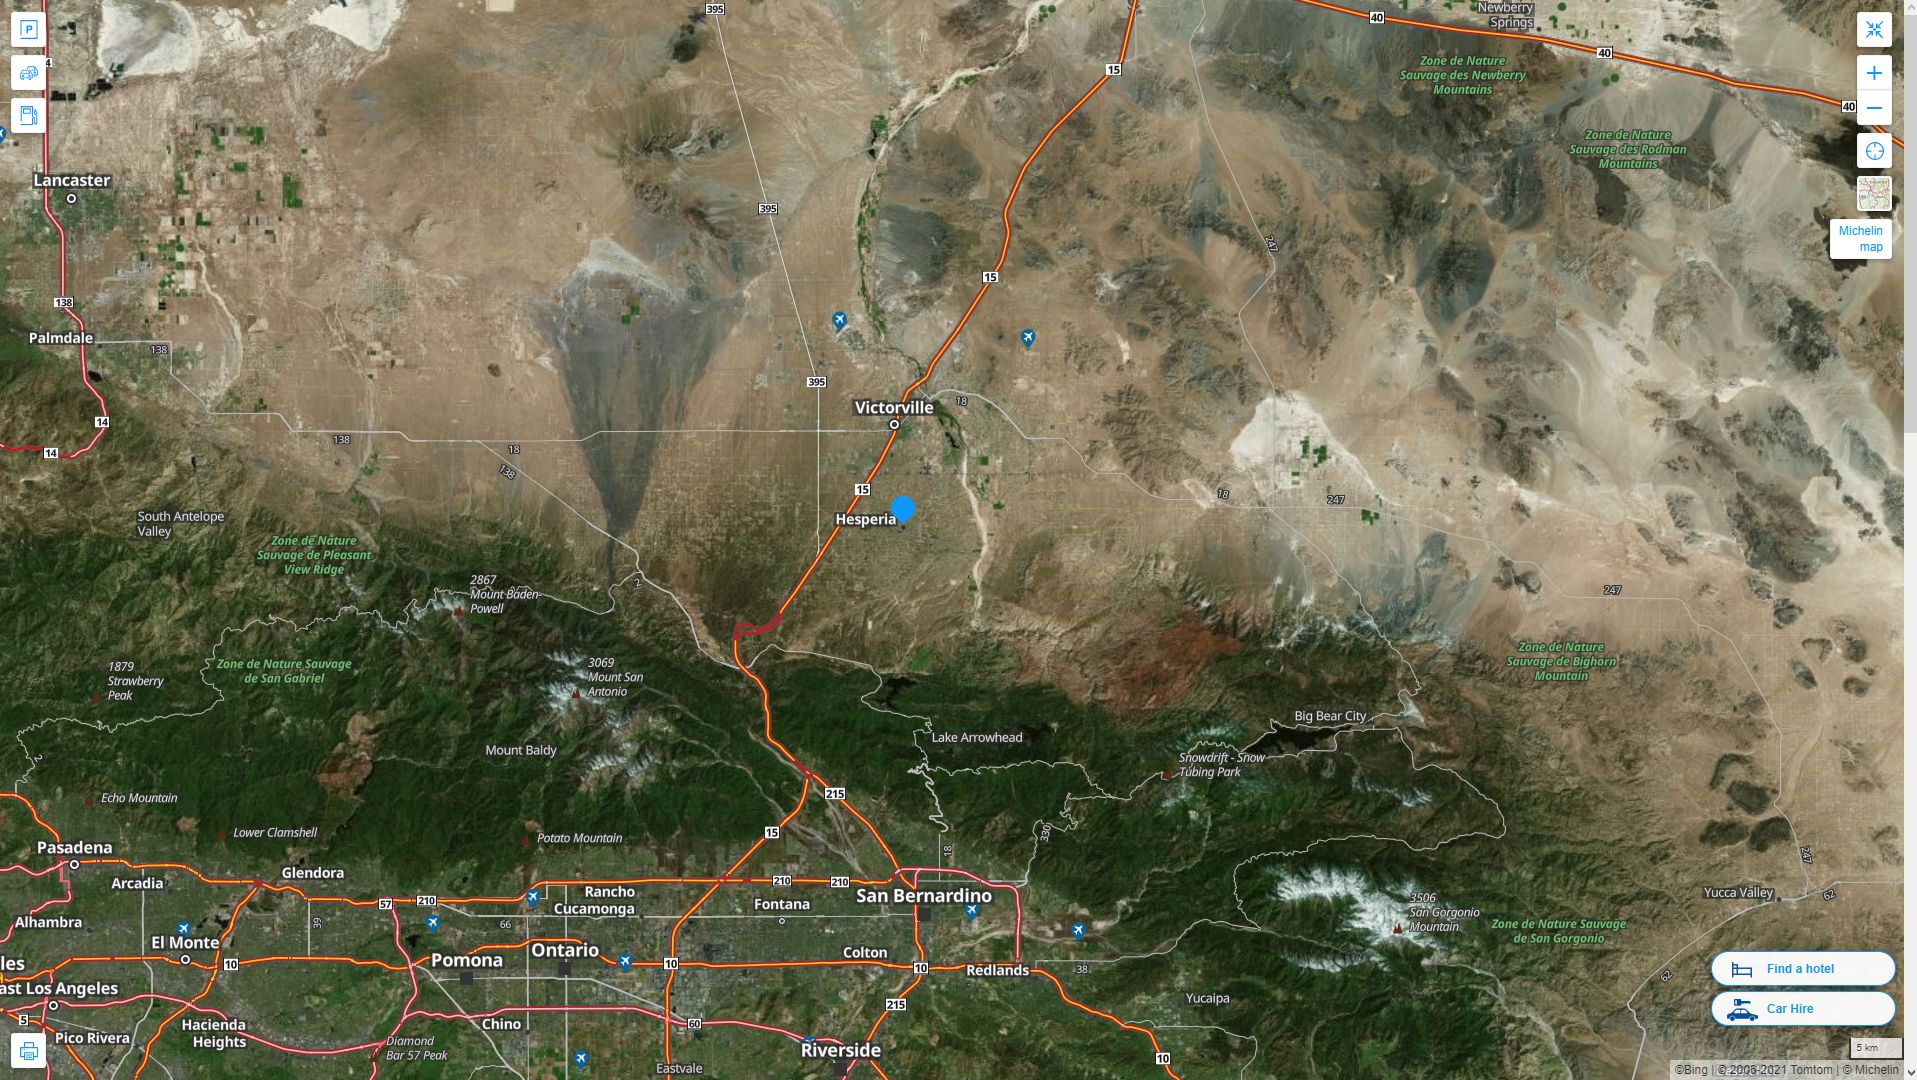 Hesperia California Highway and Road Map with Satellite View